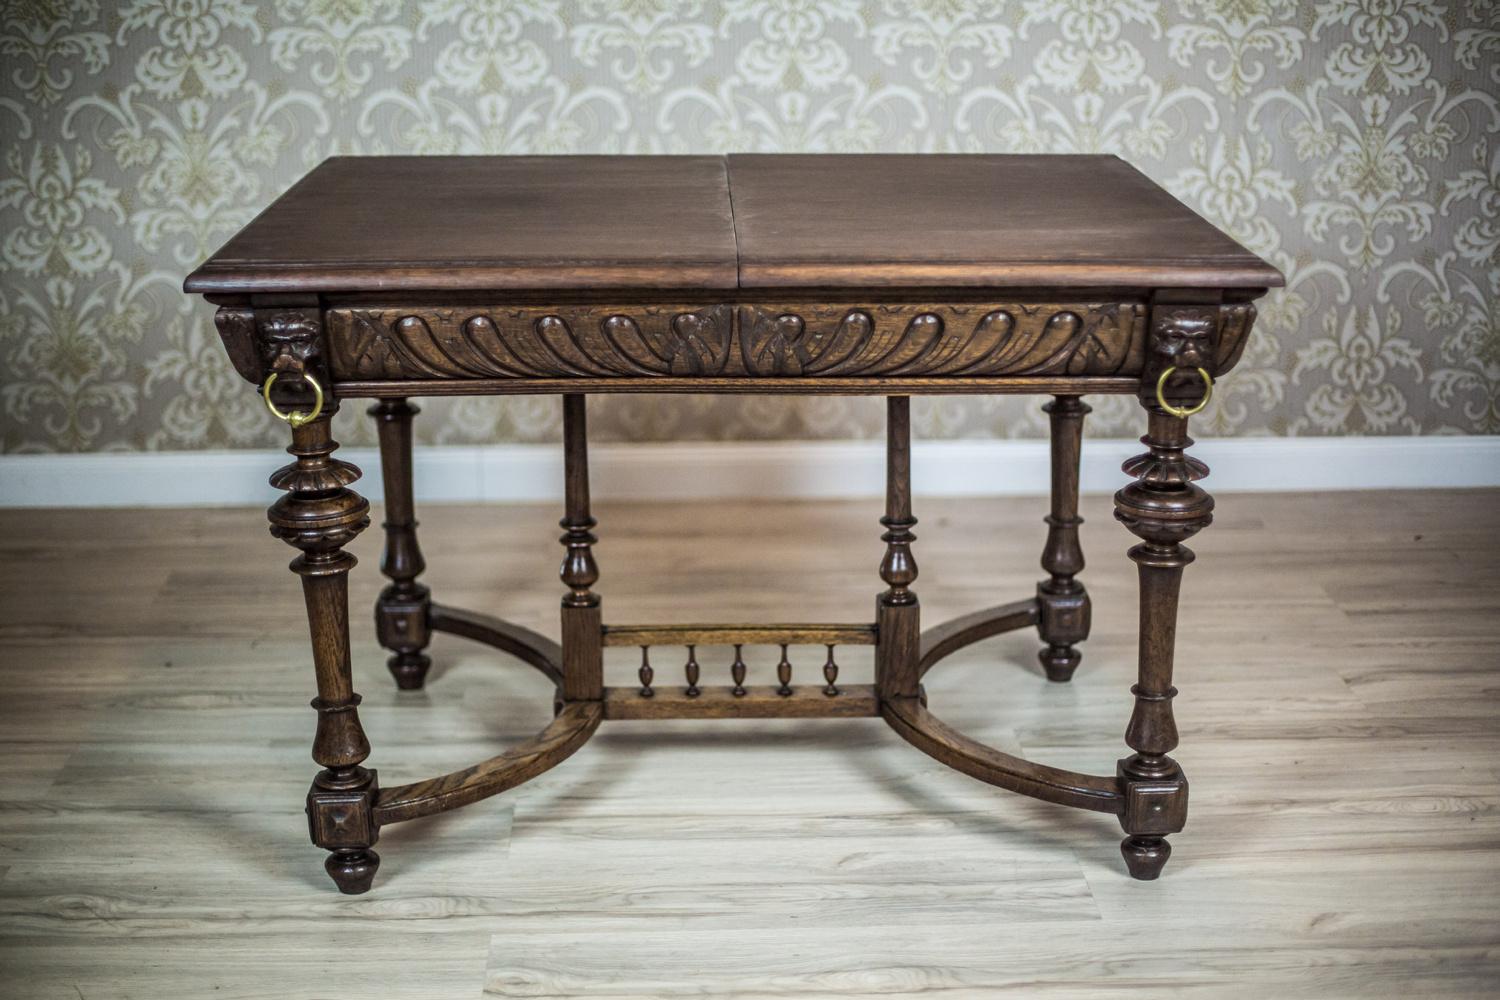 We present you this oak table, circa third quarter of the 19th century, in the Neo-Renaissance style.
The whole is supported on four turned legs, which are connected with stretchers in the shape of two semicircles with two balusters, connected with